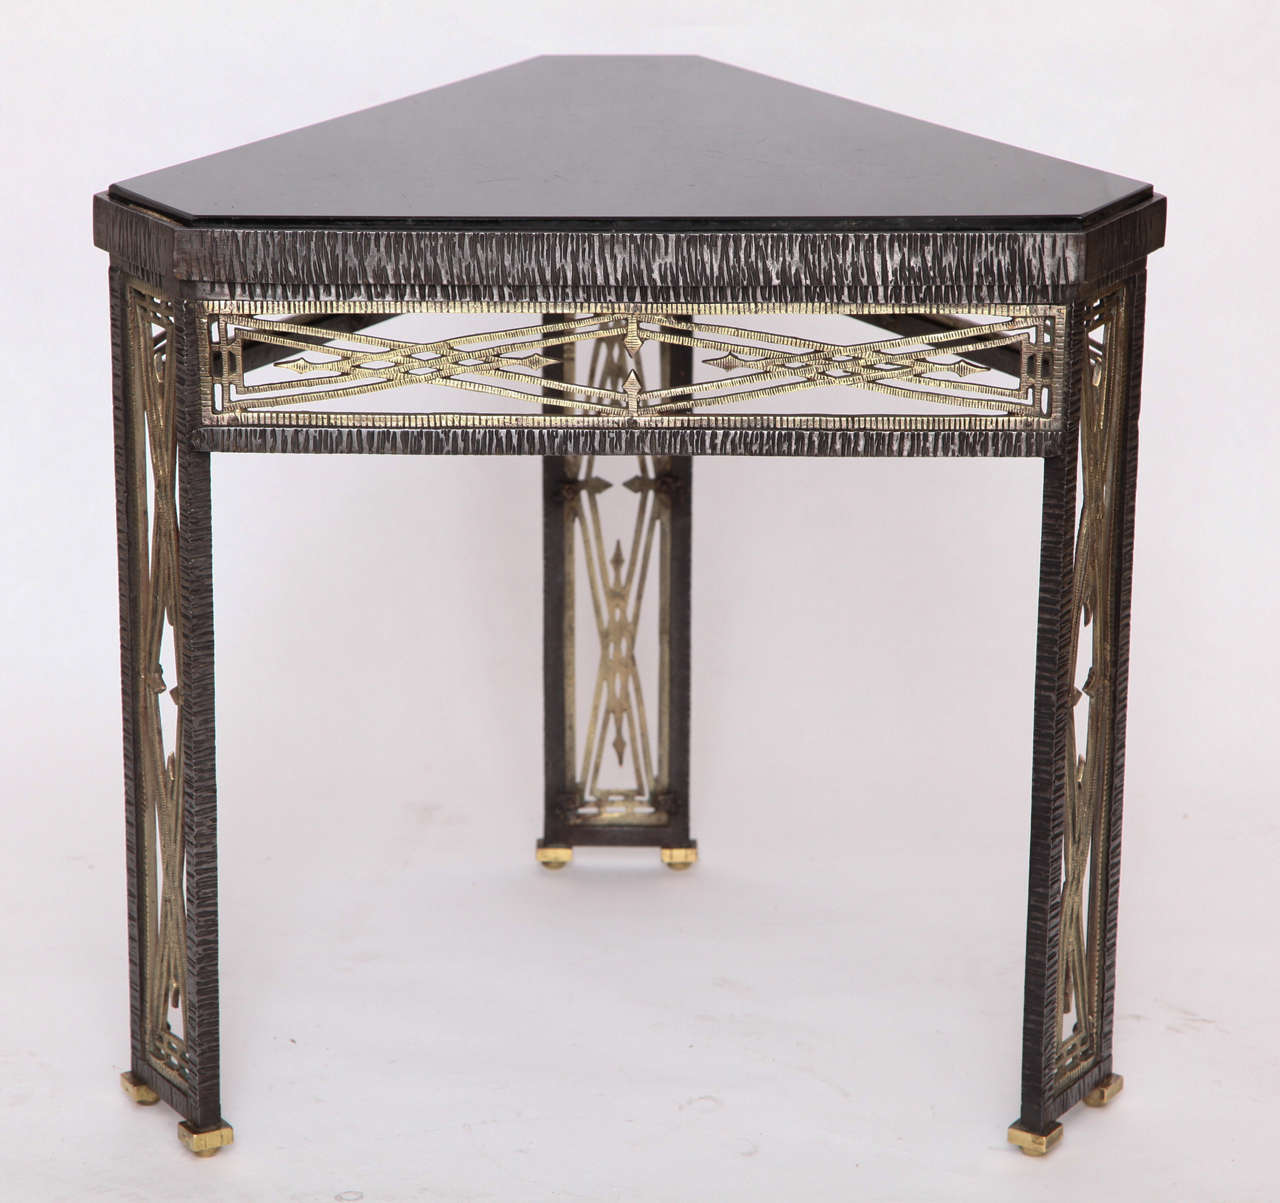 American A 1920's Art Deco Table by Jules Bouy